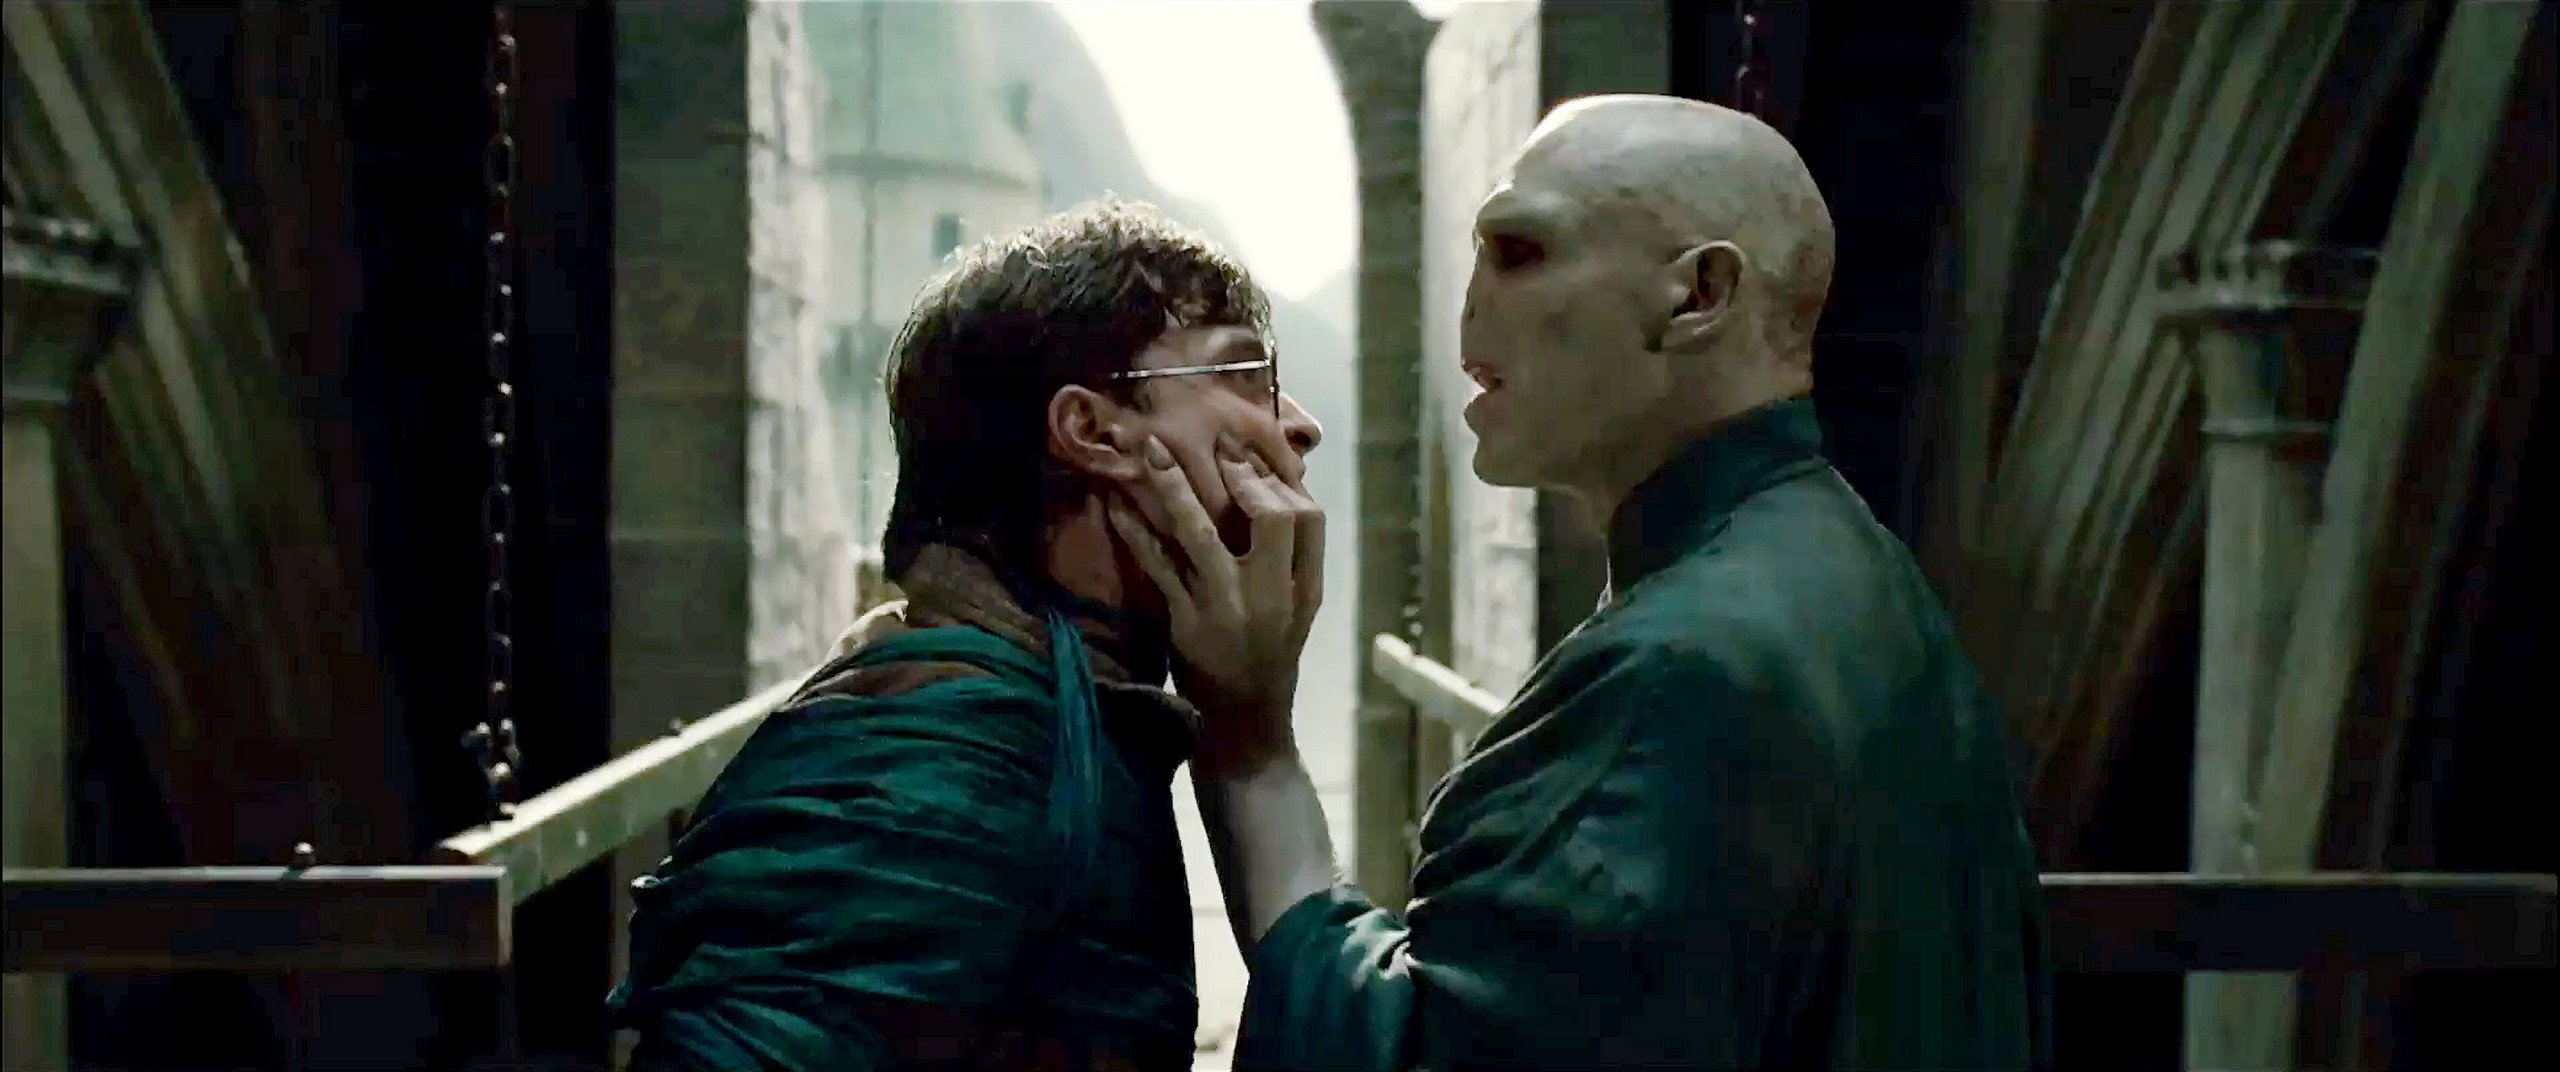 (L-r) DANIEL RADCLIFFE as Harry Potter and RALPH FIENNES as Lord Voldemort in Warner Bros. Pictures’ fantasy adventure “HARRY POTTER AND THE DEATHLY HALLOWS – PART 2,” a Warner Bros. Pictures release.